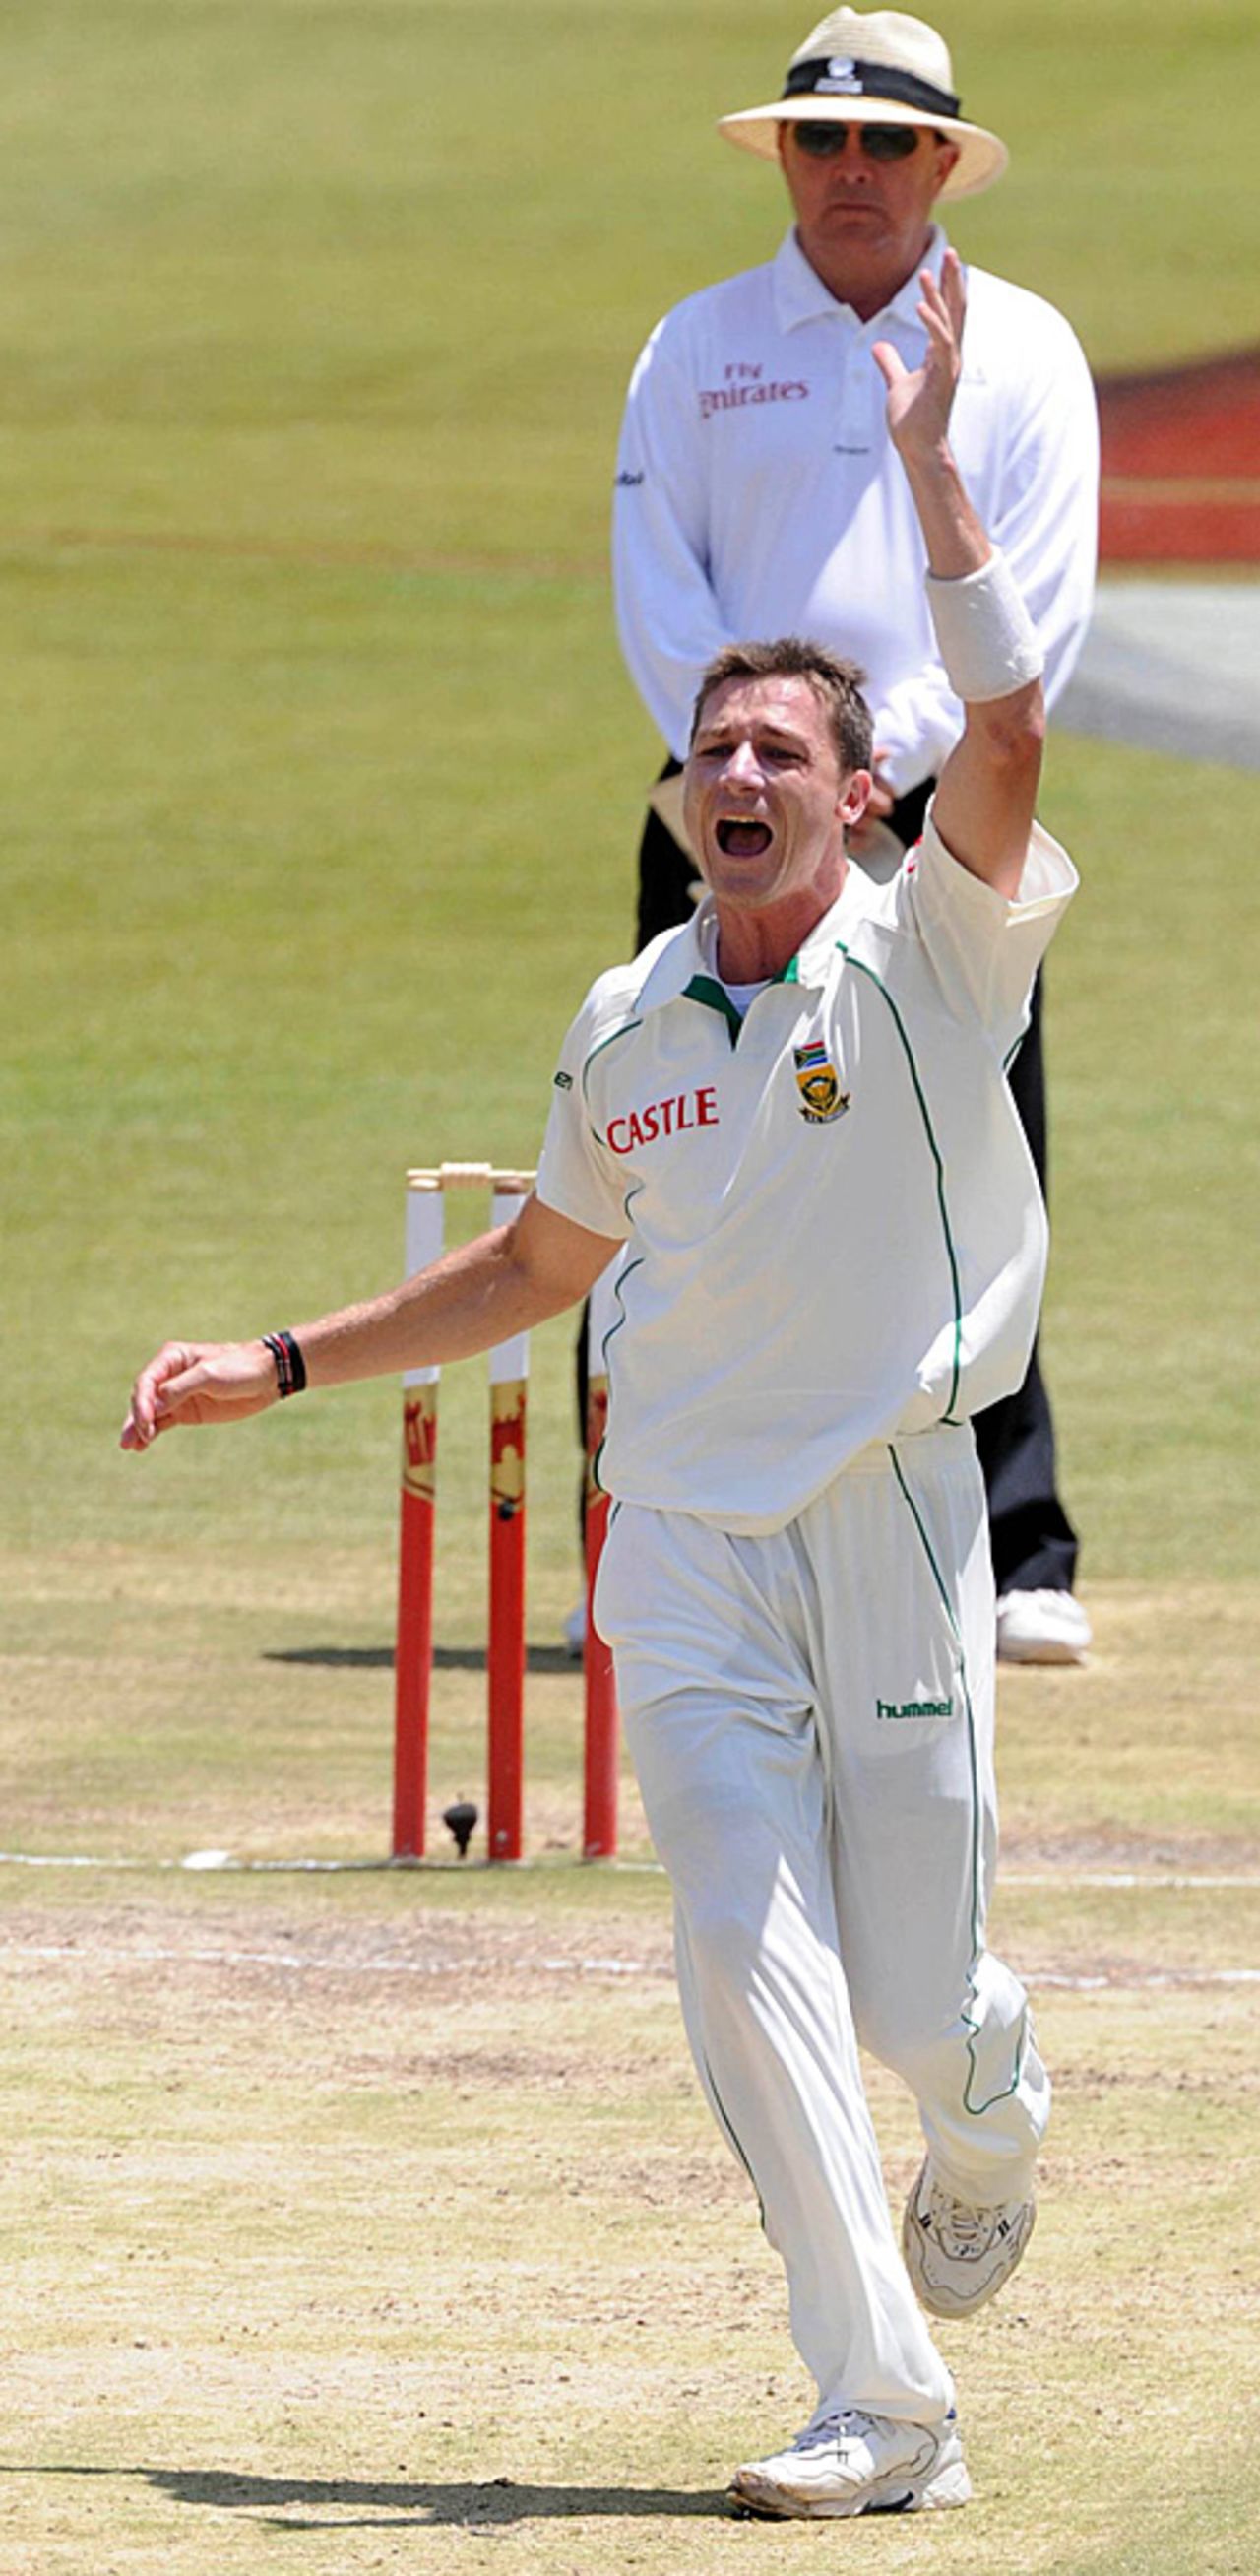 Dale Steyn took his ninth five-wicket haul as South Africa beat Bangladesh by an innings in Bloemfontein, South Africa v Bangladesh, 1st Test, Bloemfontein, November 22, 2008